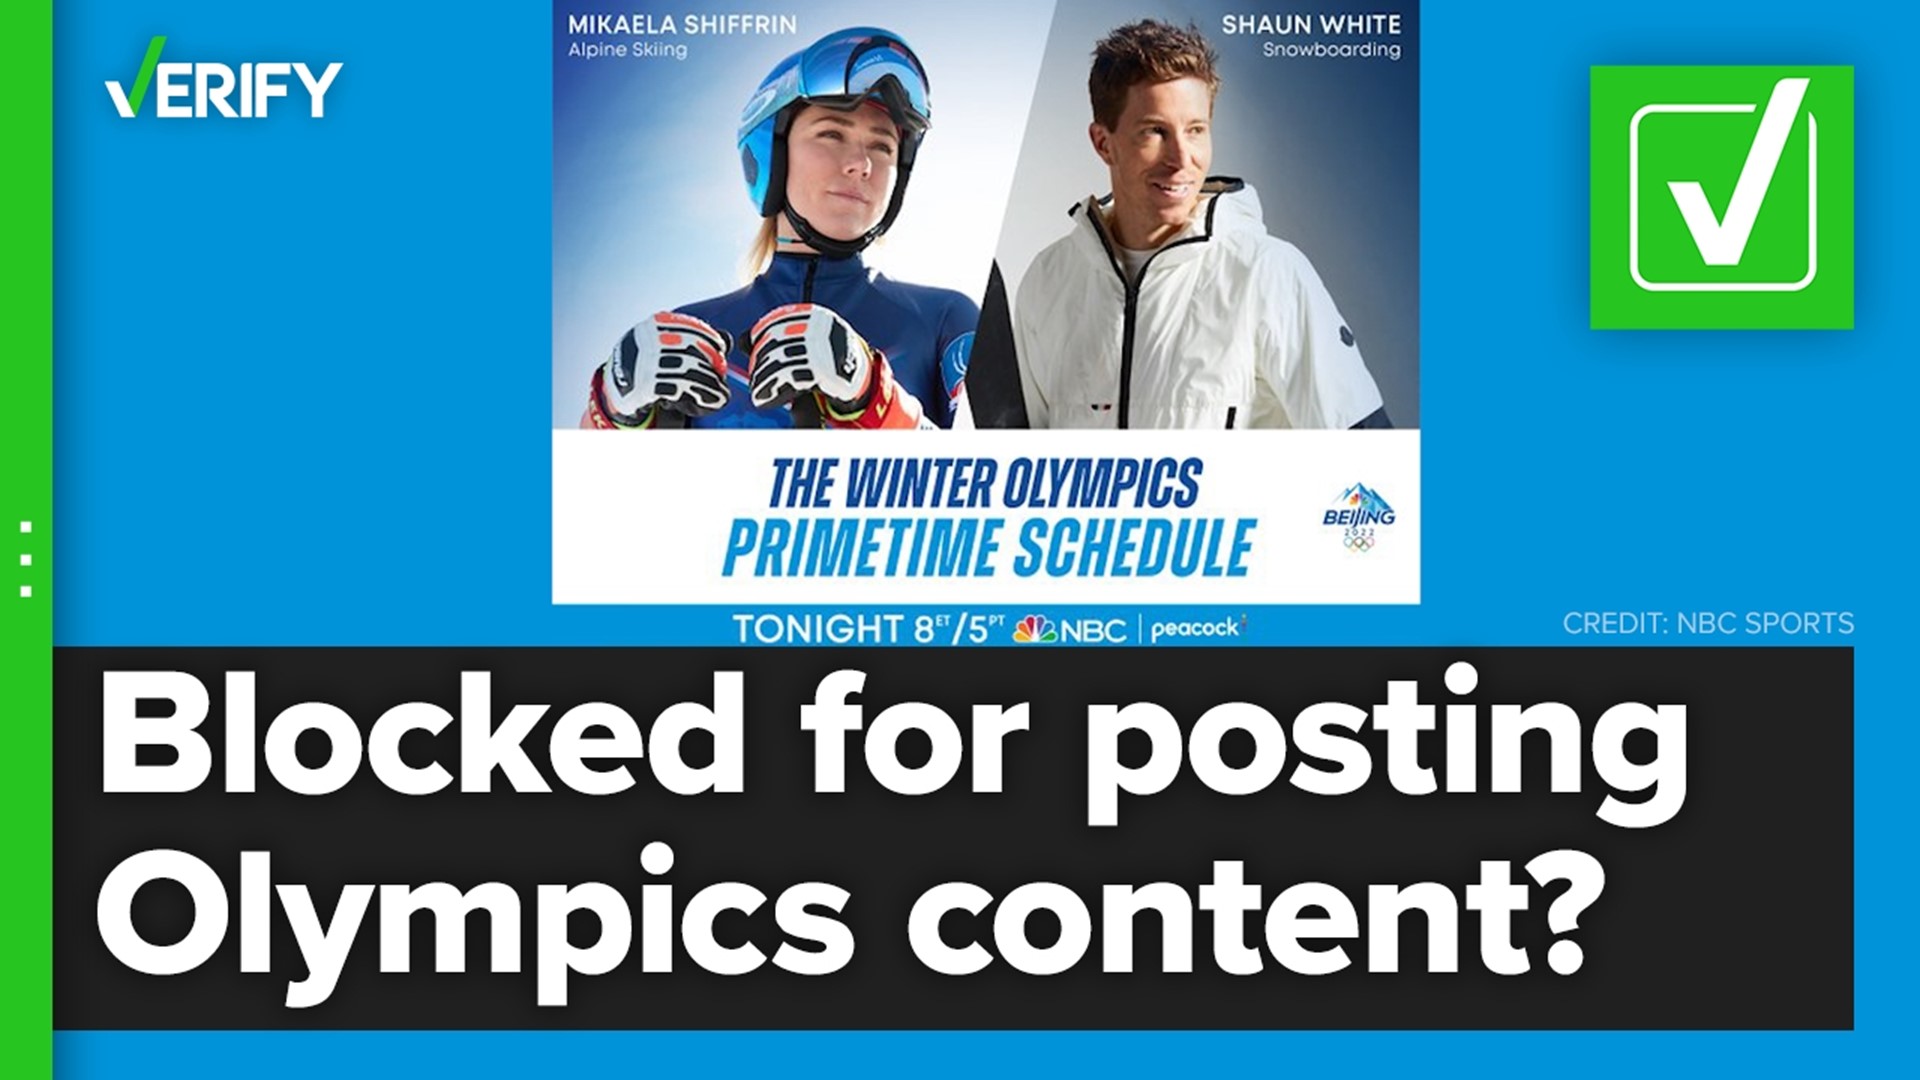 The IOC and NBC heavily restrict broadcast materials of the Olympic Games across all media, including social media.